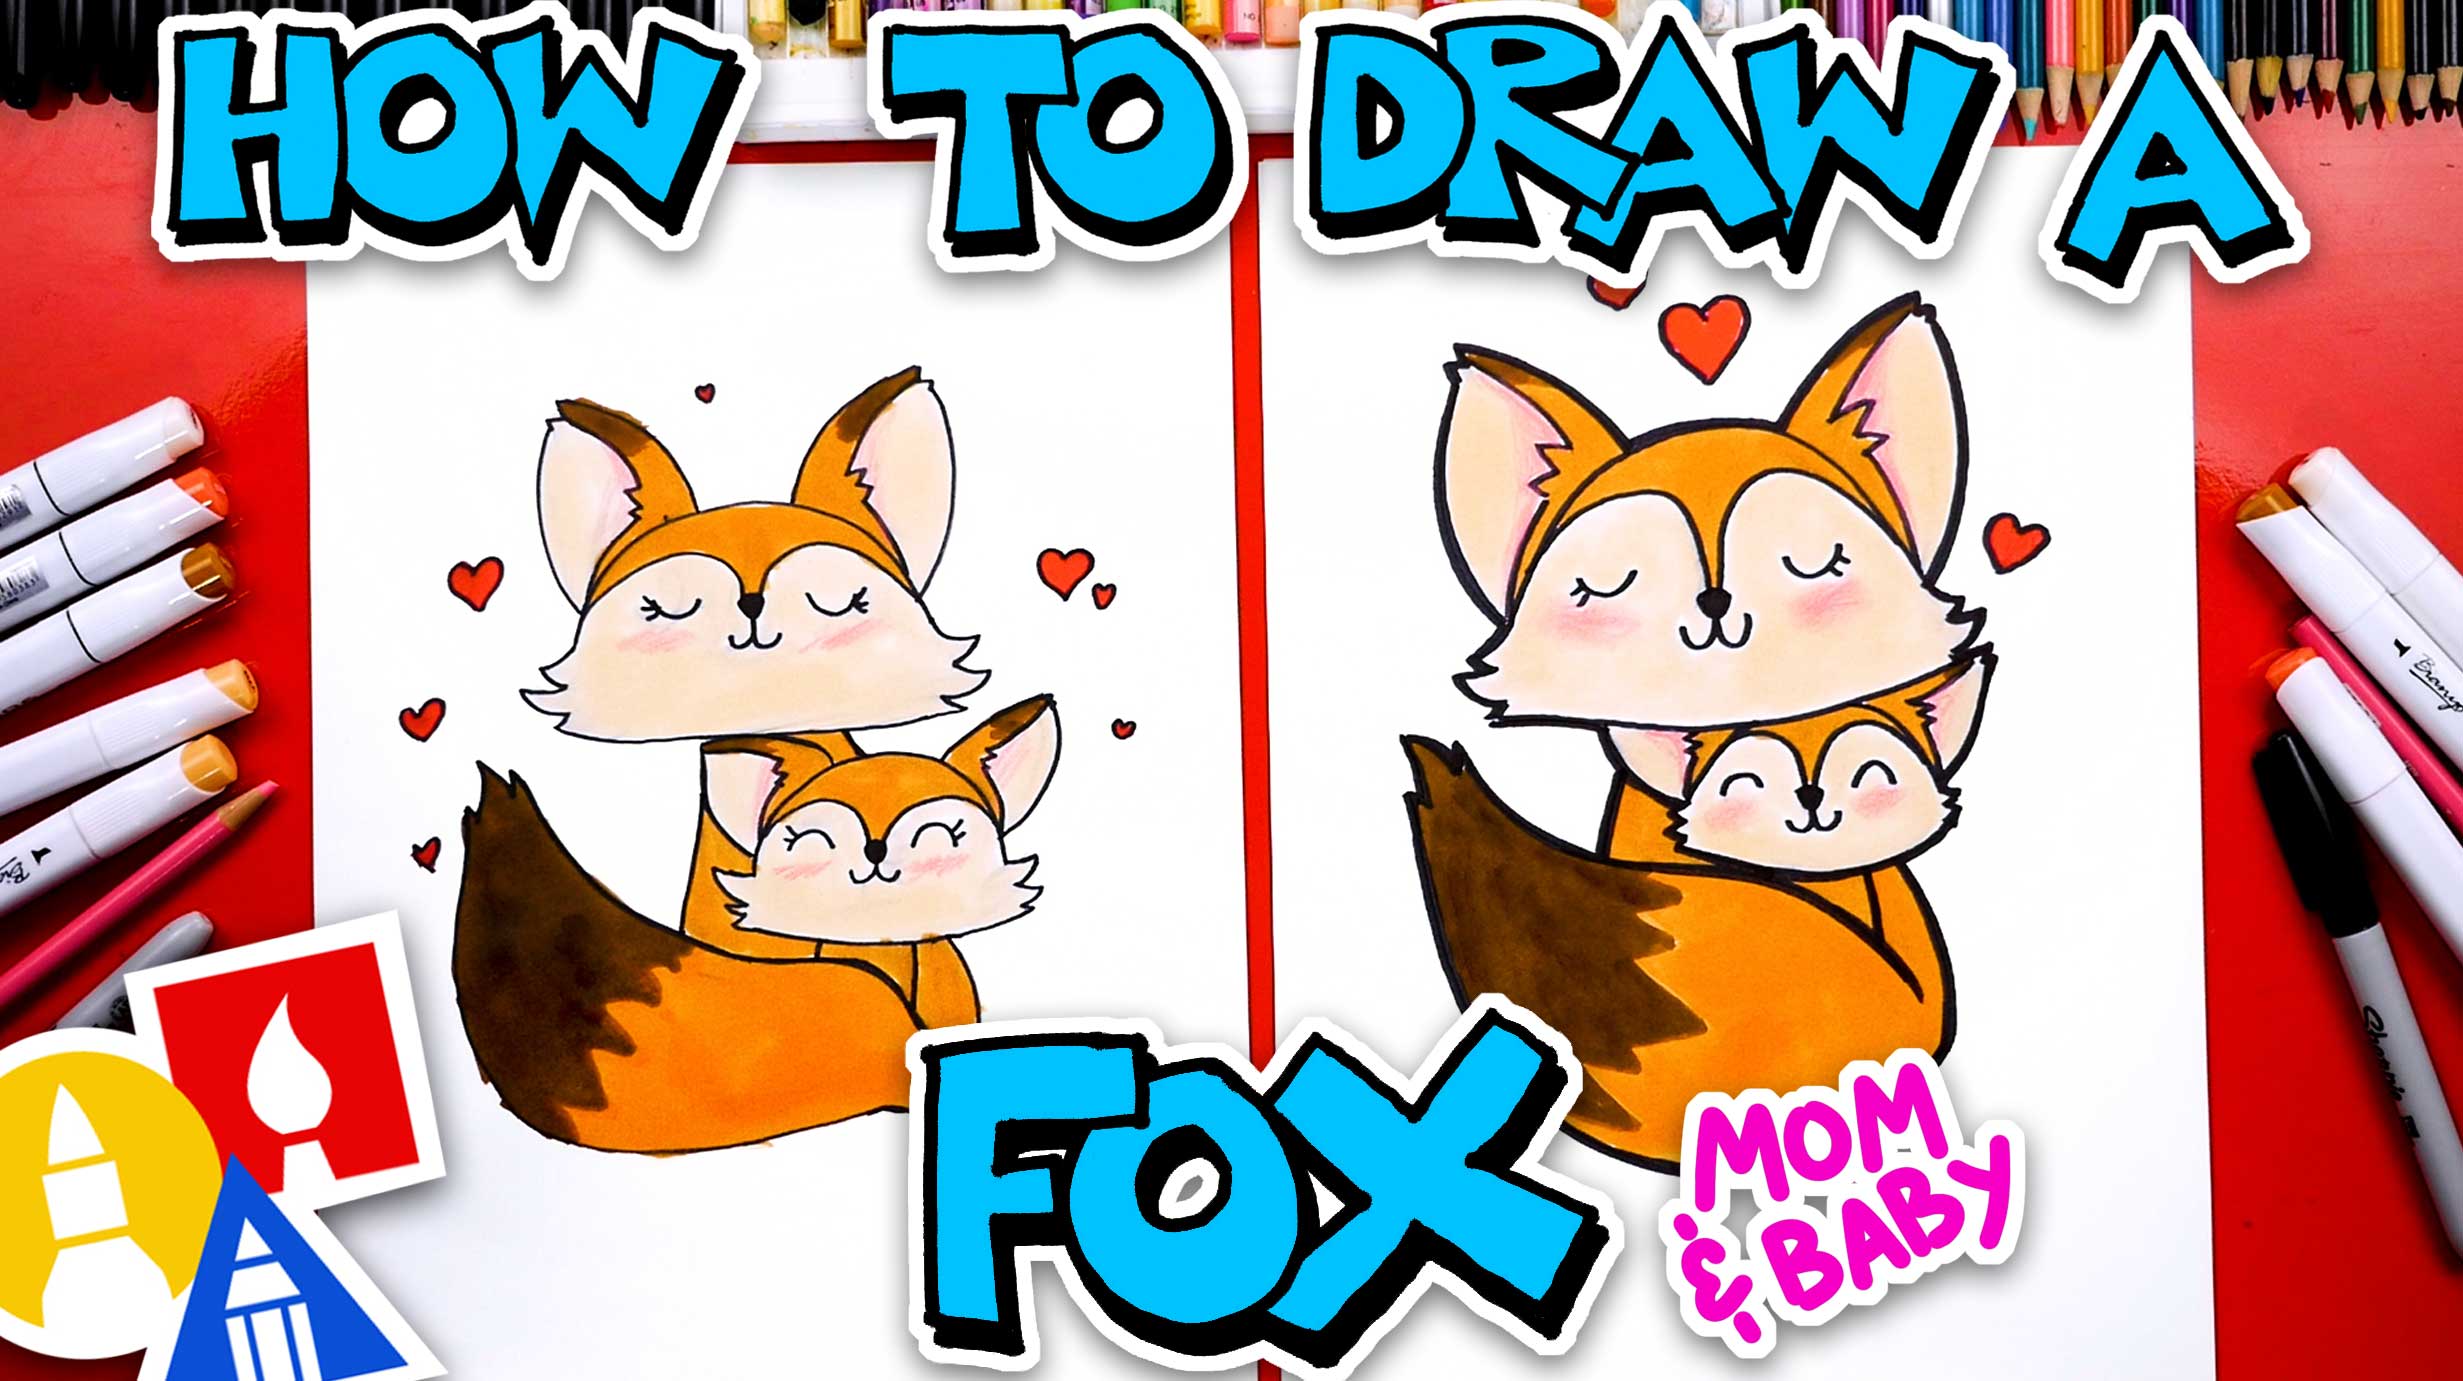 Draw a Fox with the Sketchin' Tech